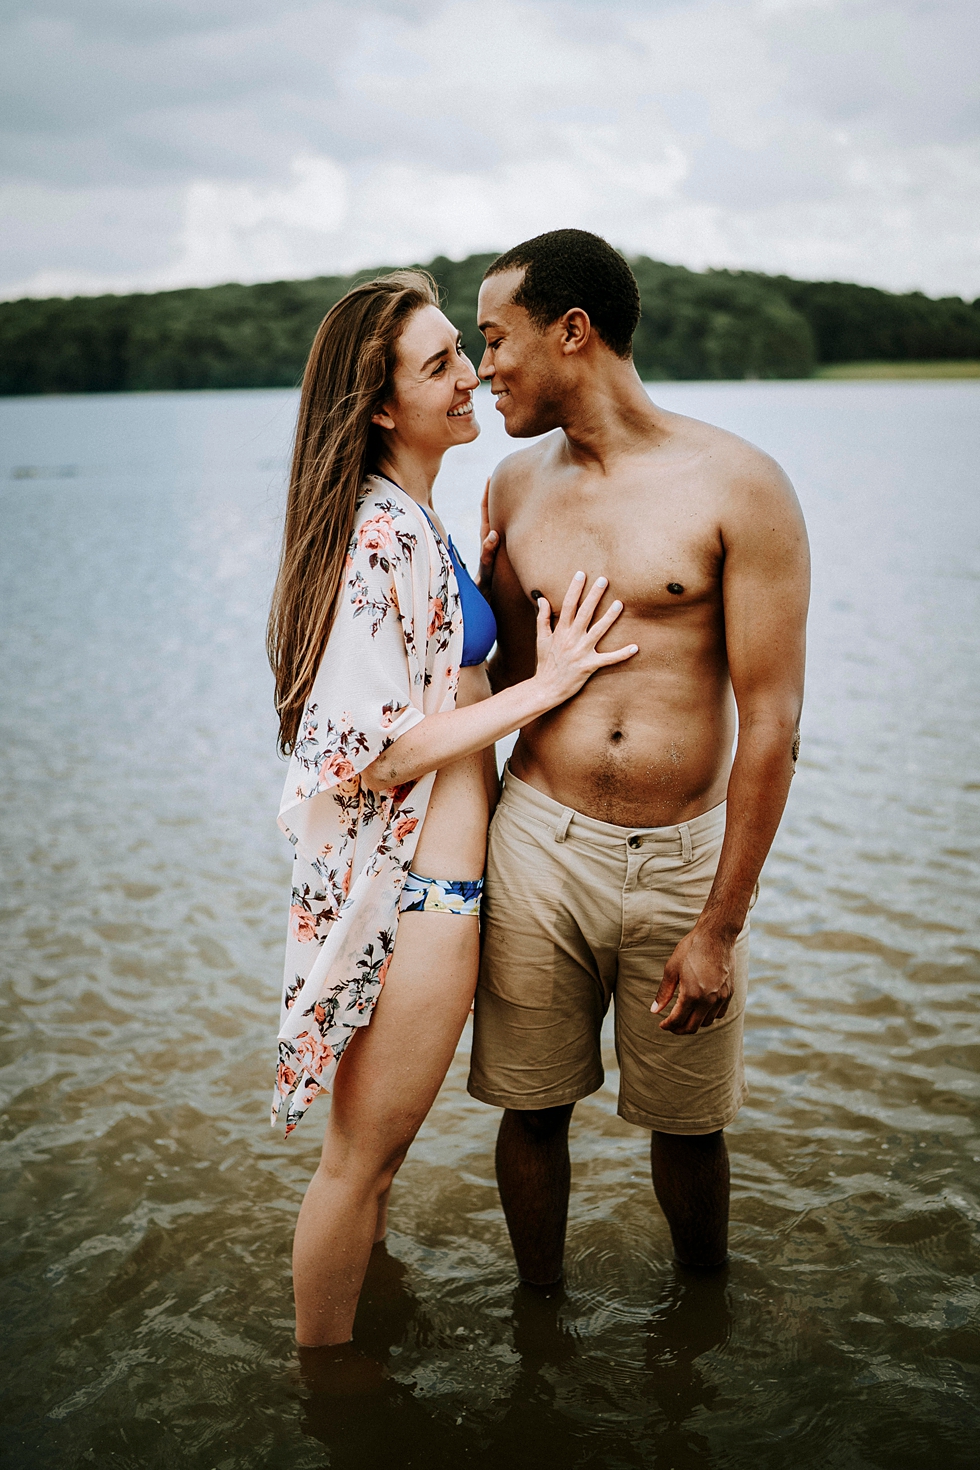  deams lake engagement photo shoot couple floral swim suit cover up smiling together arm in arm #engagementphotographer #louisvilleengagementphotographer #kentuckyengagmentphotographer #kentuckyengagments #engagementshoot #loveisintheair 